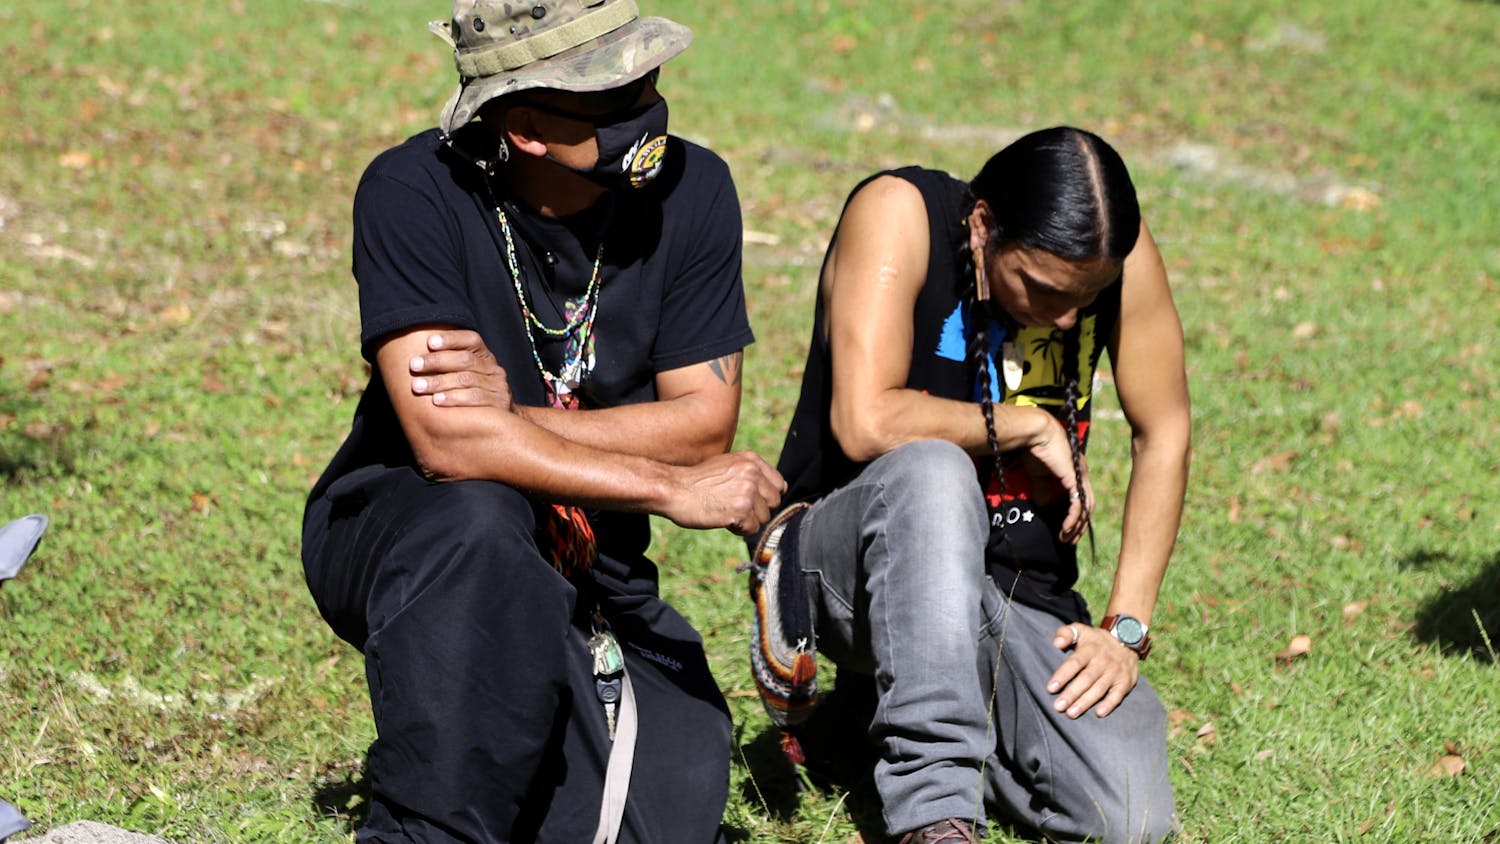 Robert Rosa (left), 52, a member of the Borinquen Taino nation and Stuart Flores (right), a member of the Algonquin Maya nation, kneel together, during the protest, in honor of their ancestors on Thursday, Dec. 3, 2020. The two explained that in Native American culture ancestors return to the soil after they pass away. 